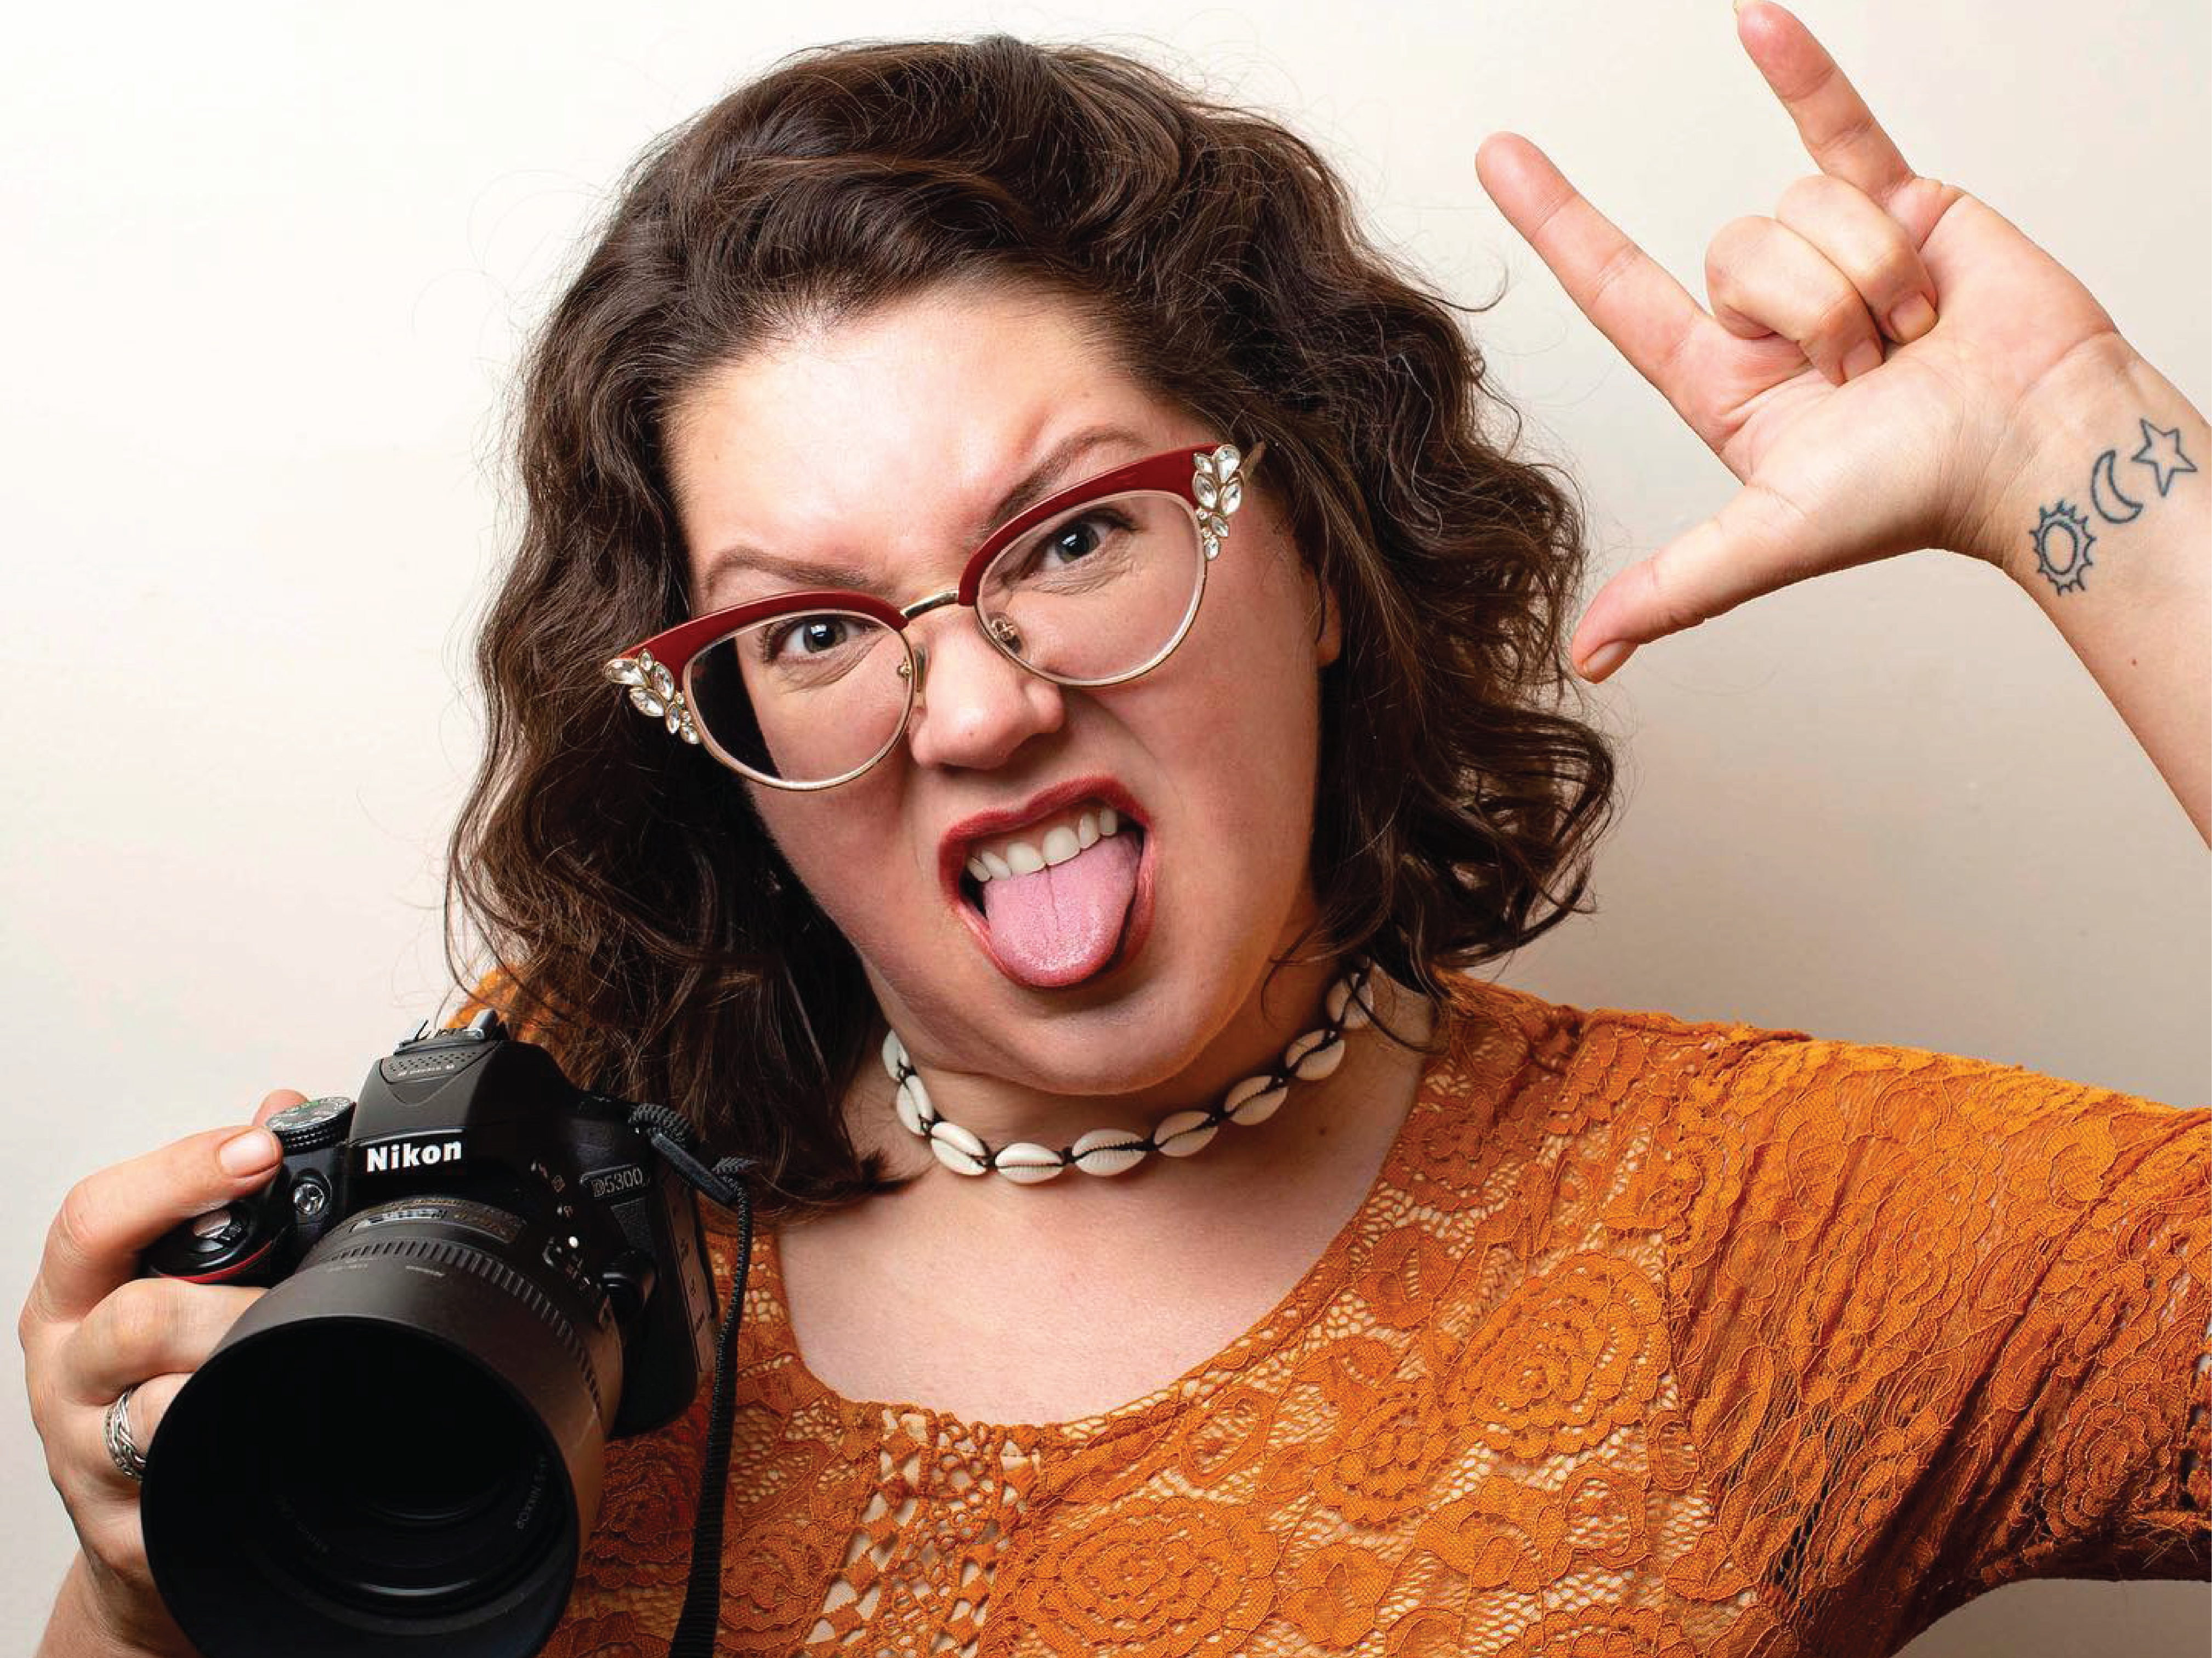 Photographer Sierra Rei Hart in a rock and roll pose with her tongue out